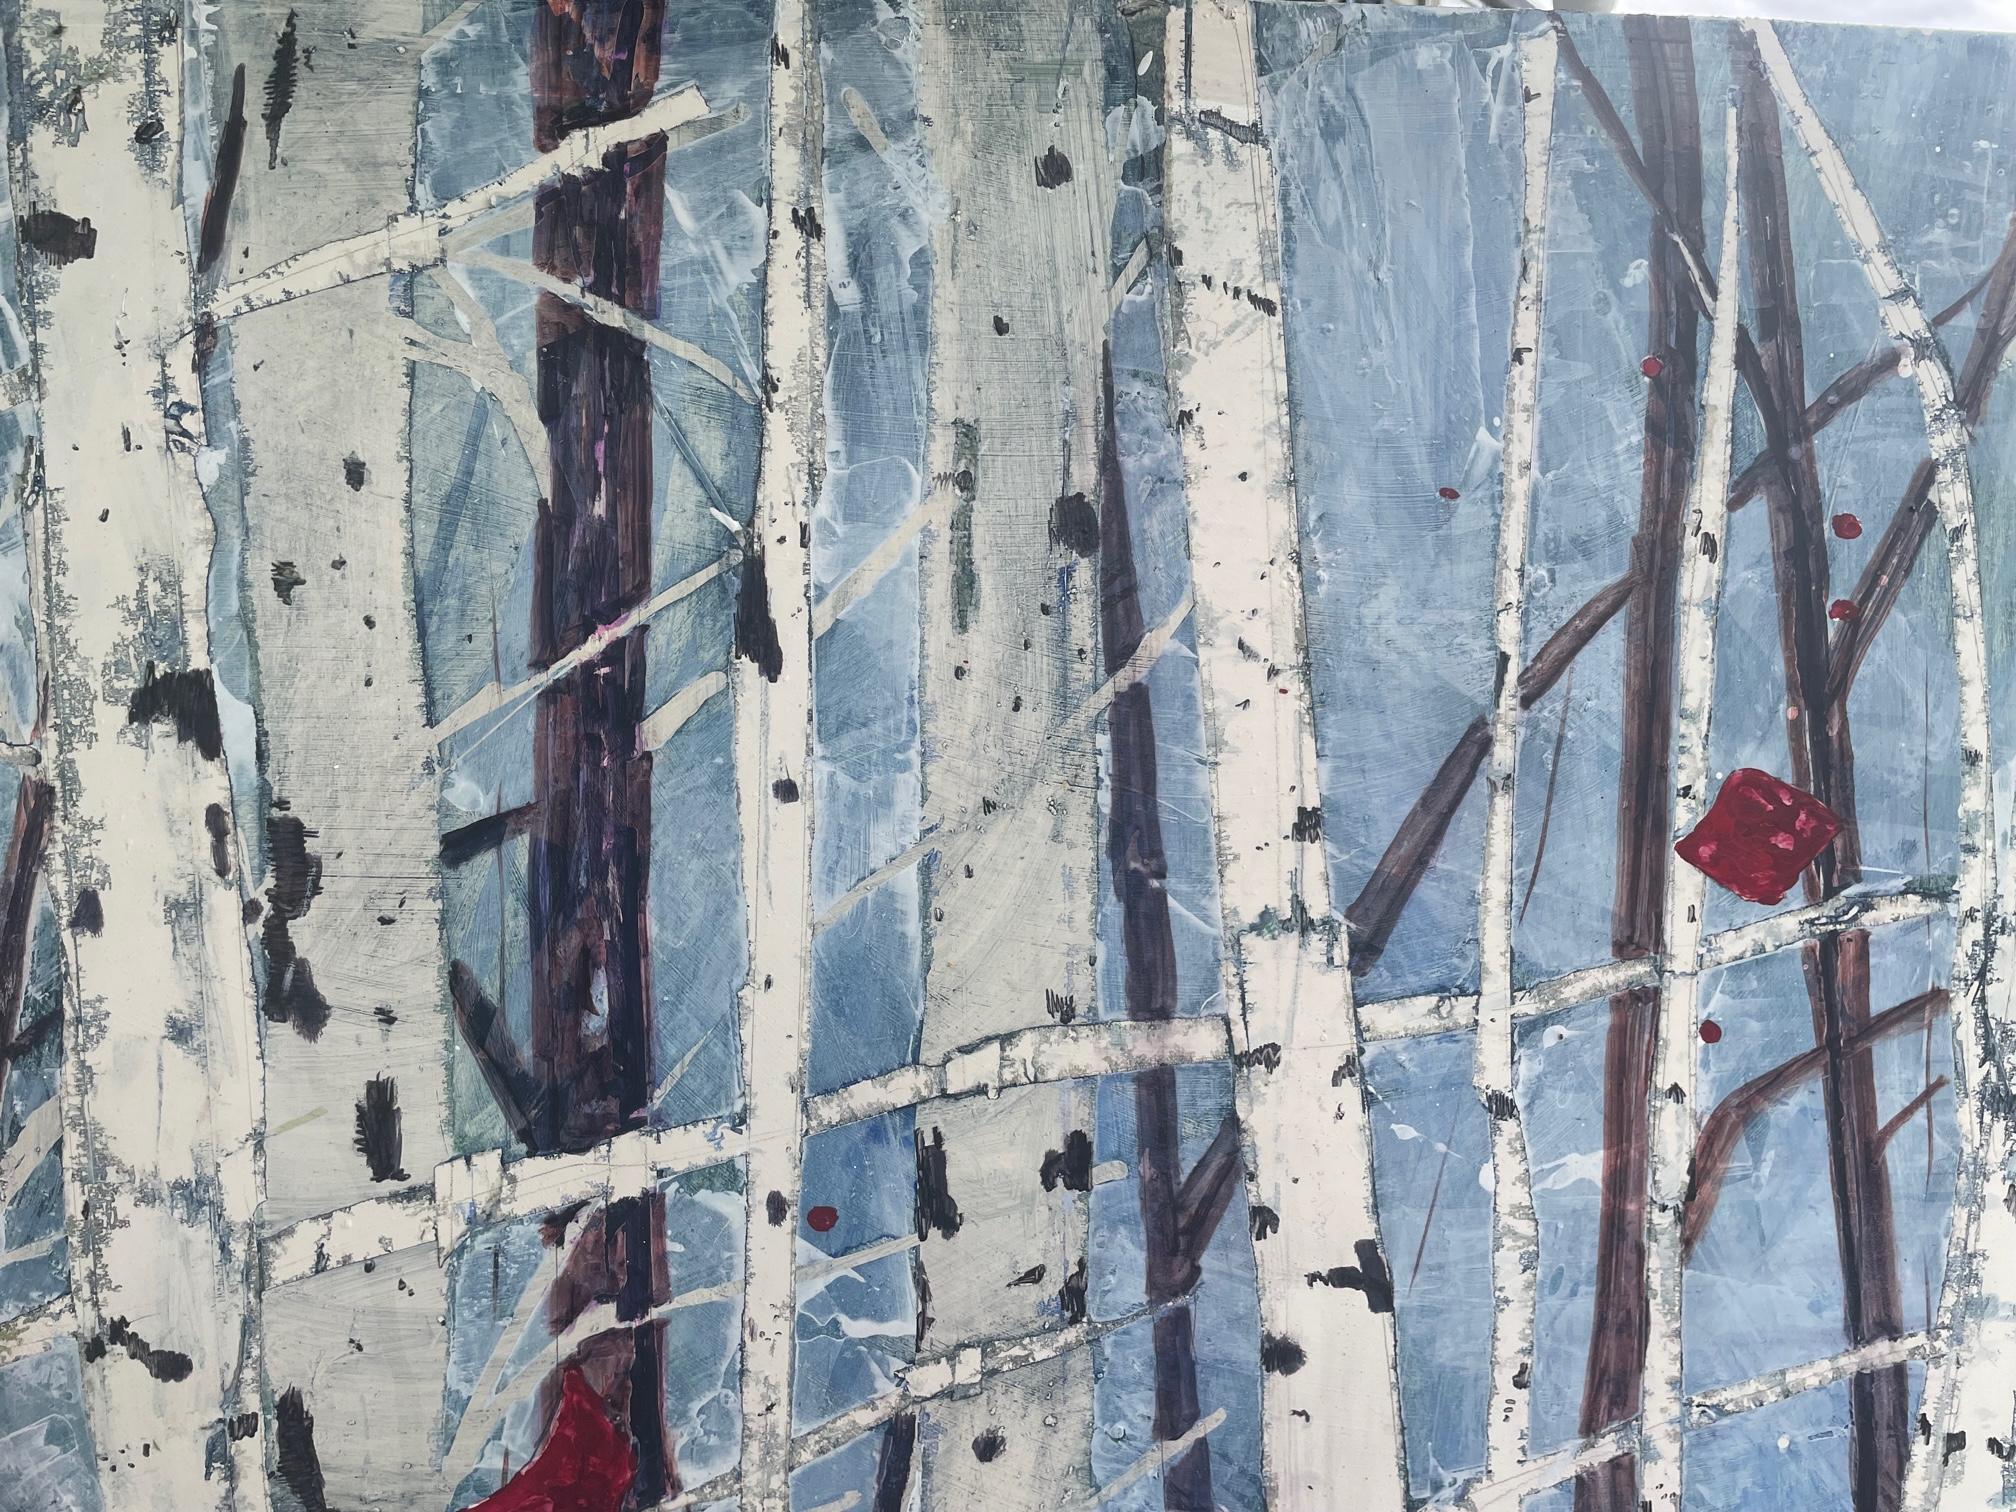 Song Walking, Original Contemporary Blue and White Mixed Media Diptych Paintings, 2021
40